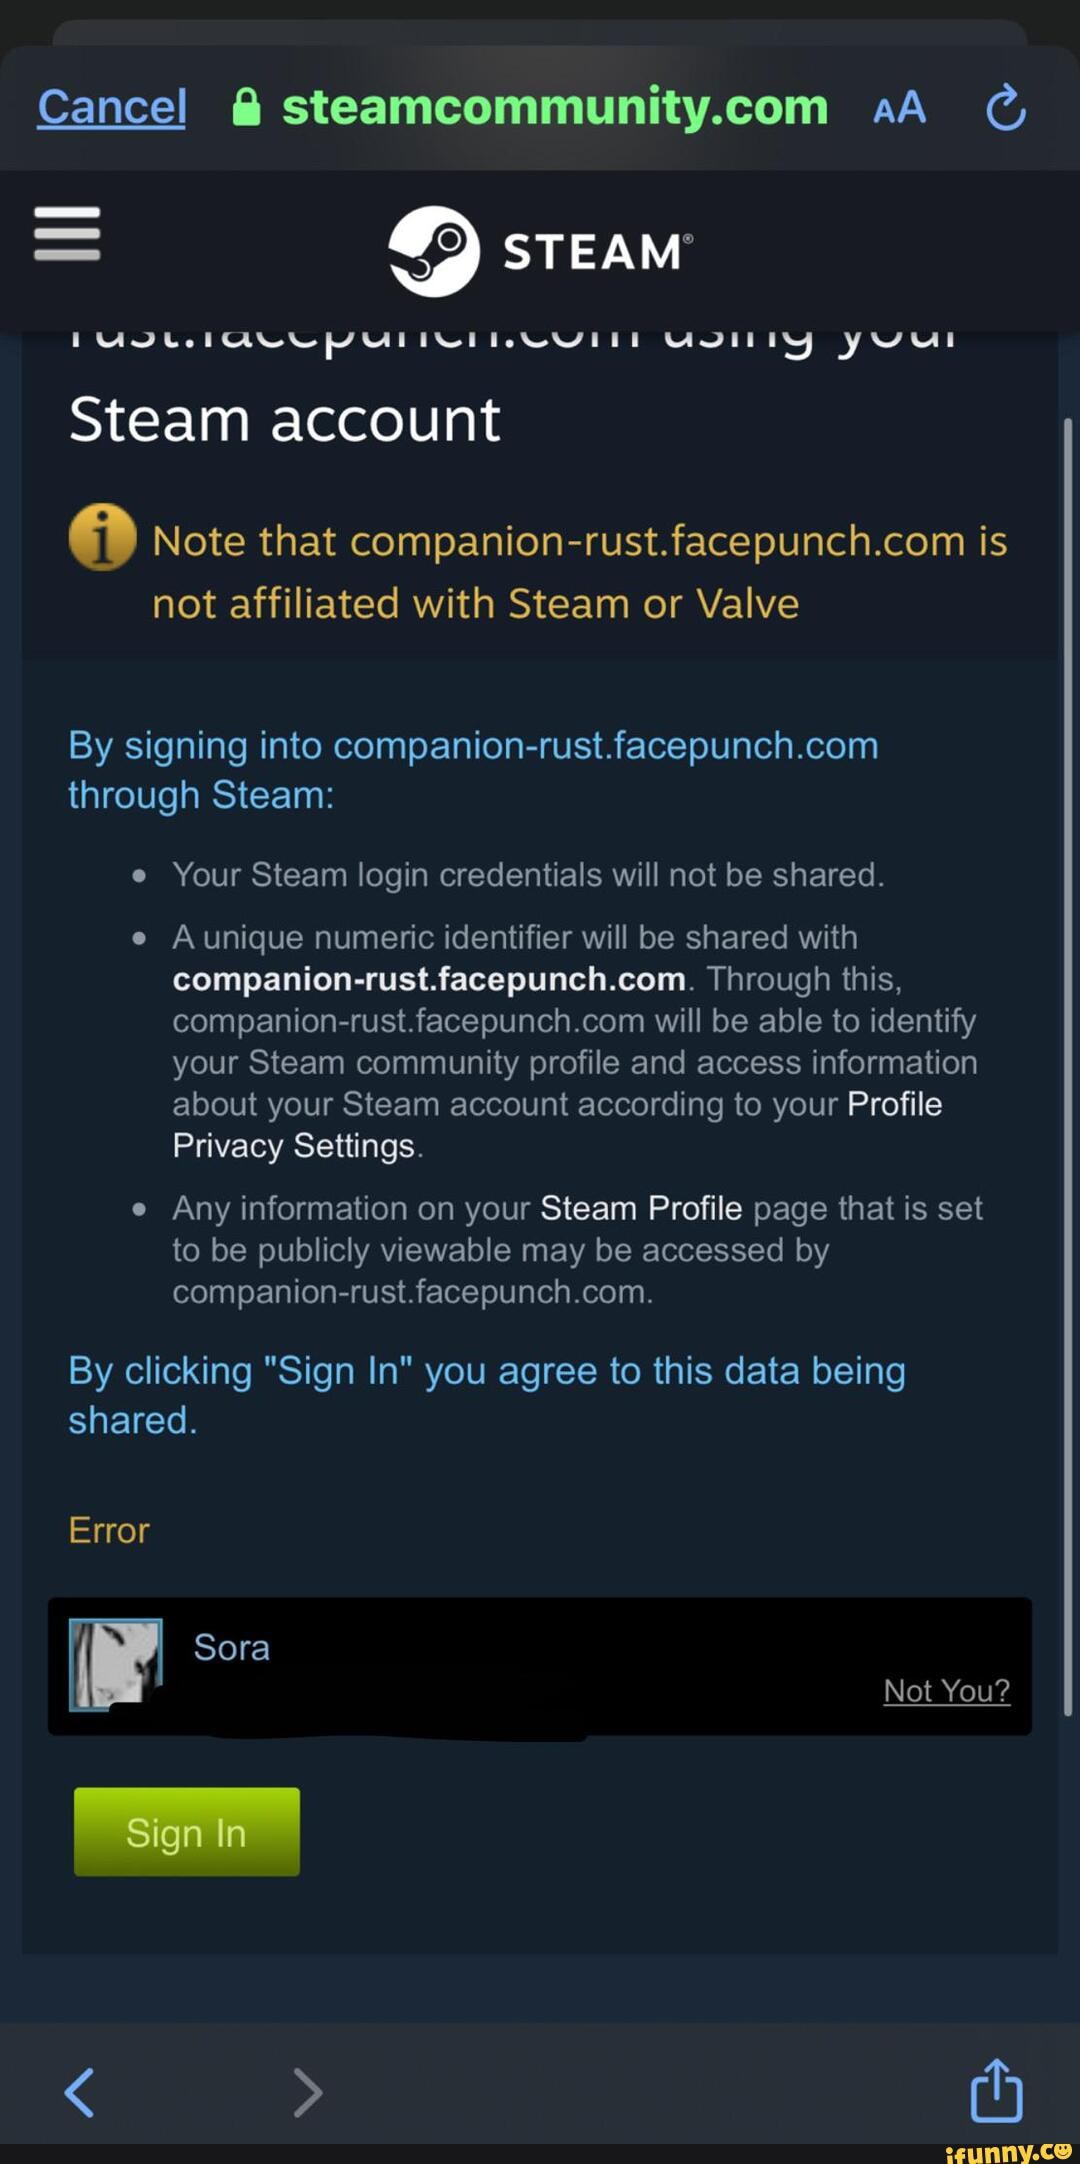 Note that is not affiliated with steam or valve